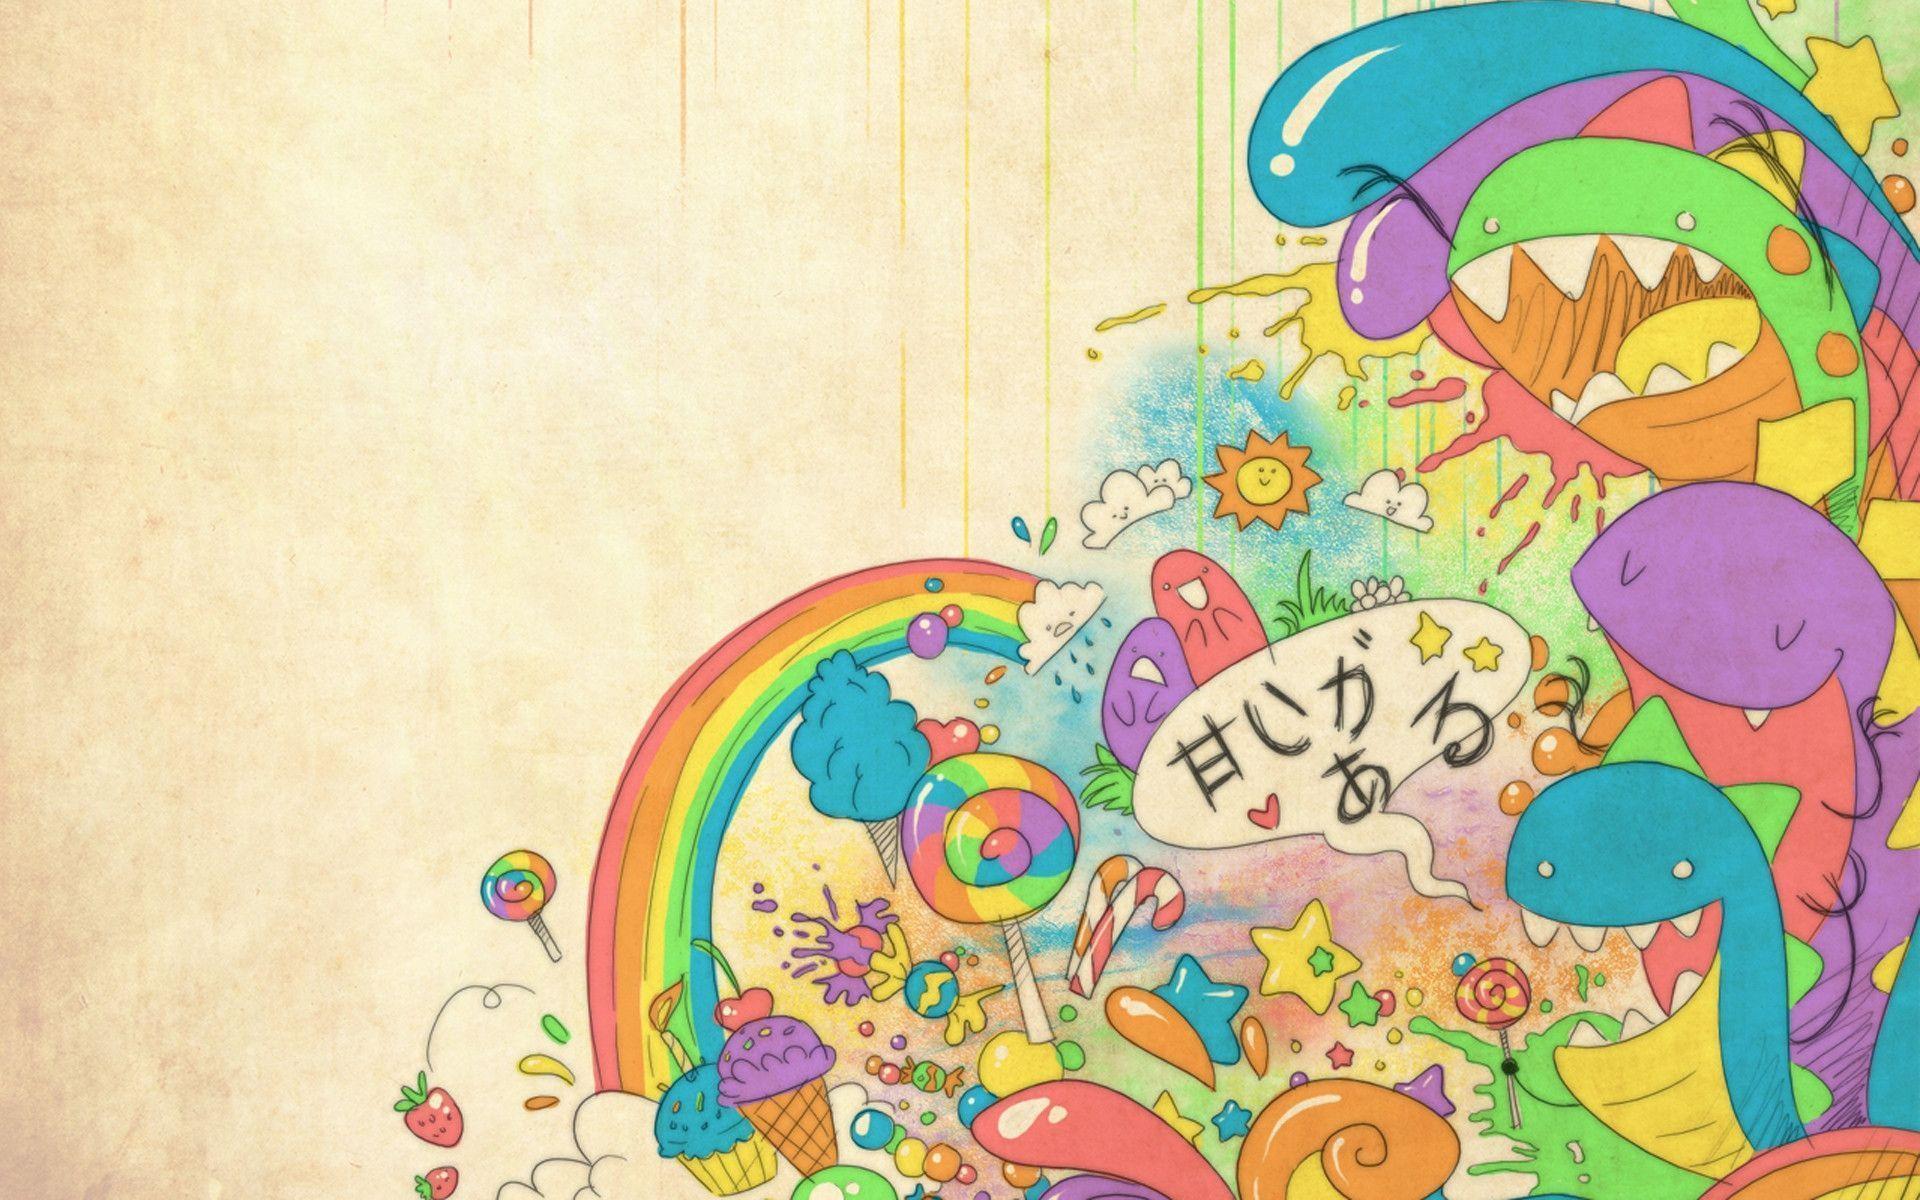 Candy wallpaper twitter candy background cartoon picture